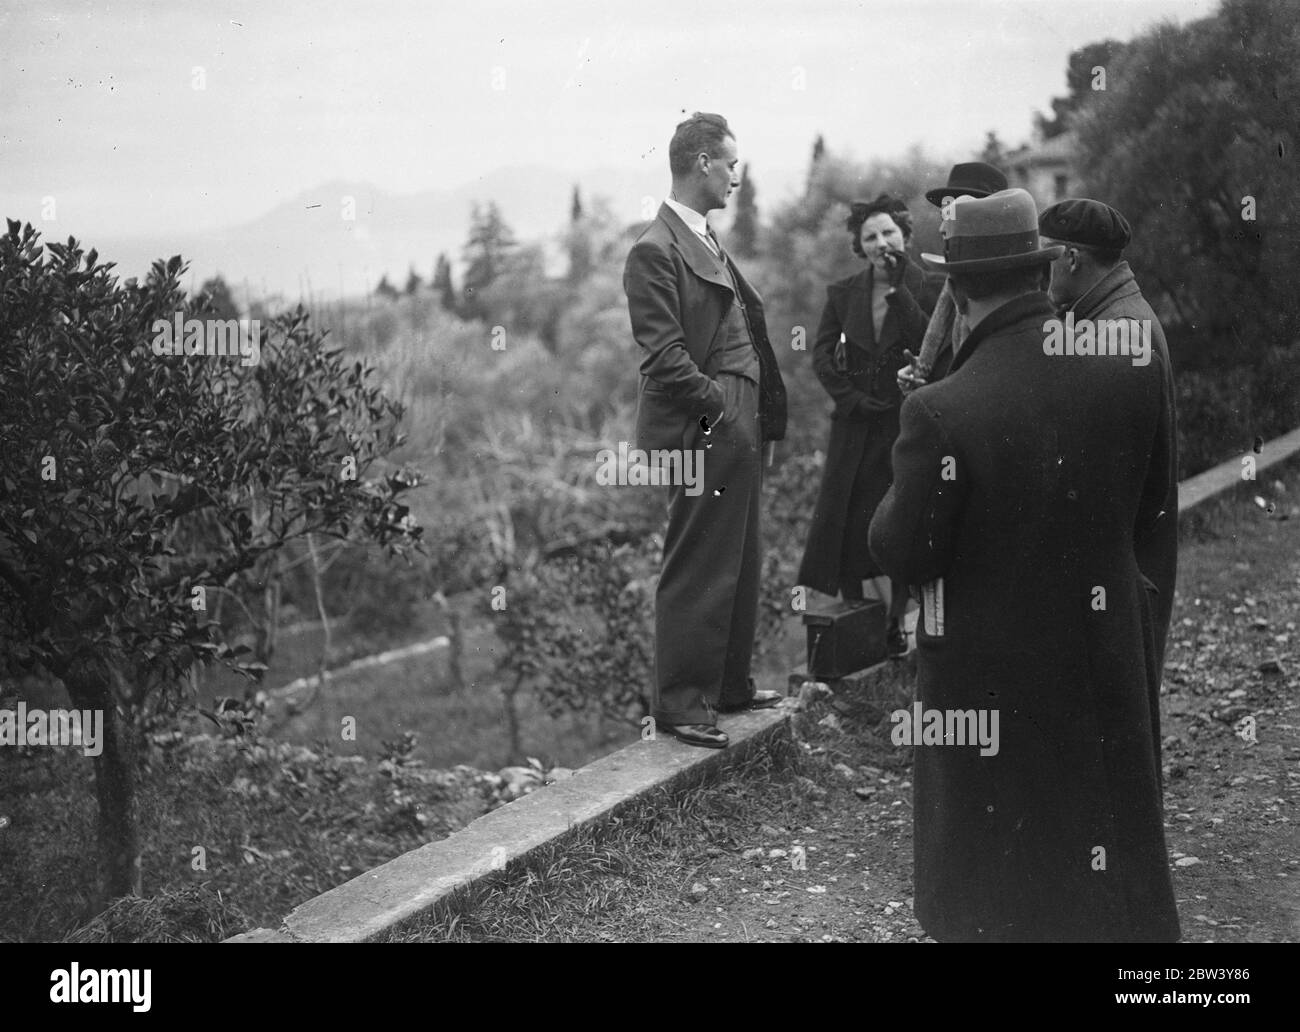 Mrs Simpson's only bodyguard interviews callers after the abdication news. King Edward's personal detective. Now that French detectives are being withdrawn from the Villa Lou Vici, Miss Wallis Simpson's Cannes retreat, Inspector Evans one of King Edward's personal detectives, is left as Mrs Simpson's sole bodyguard. Photo shows: Inspector Evans, Mrs Simpsons bodyguard, interviewing callers at the entrance to the Villa Lou Vici after the announcement of the abdication. 11 December 1936 Stock Photo